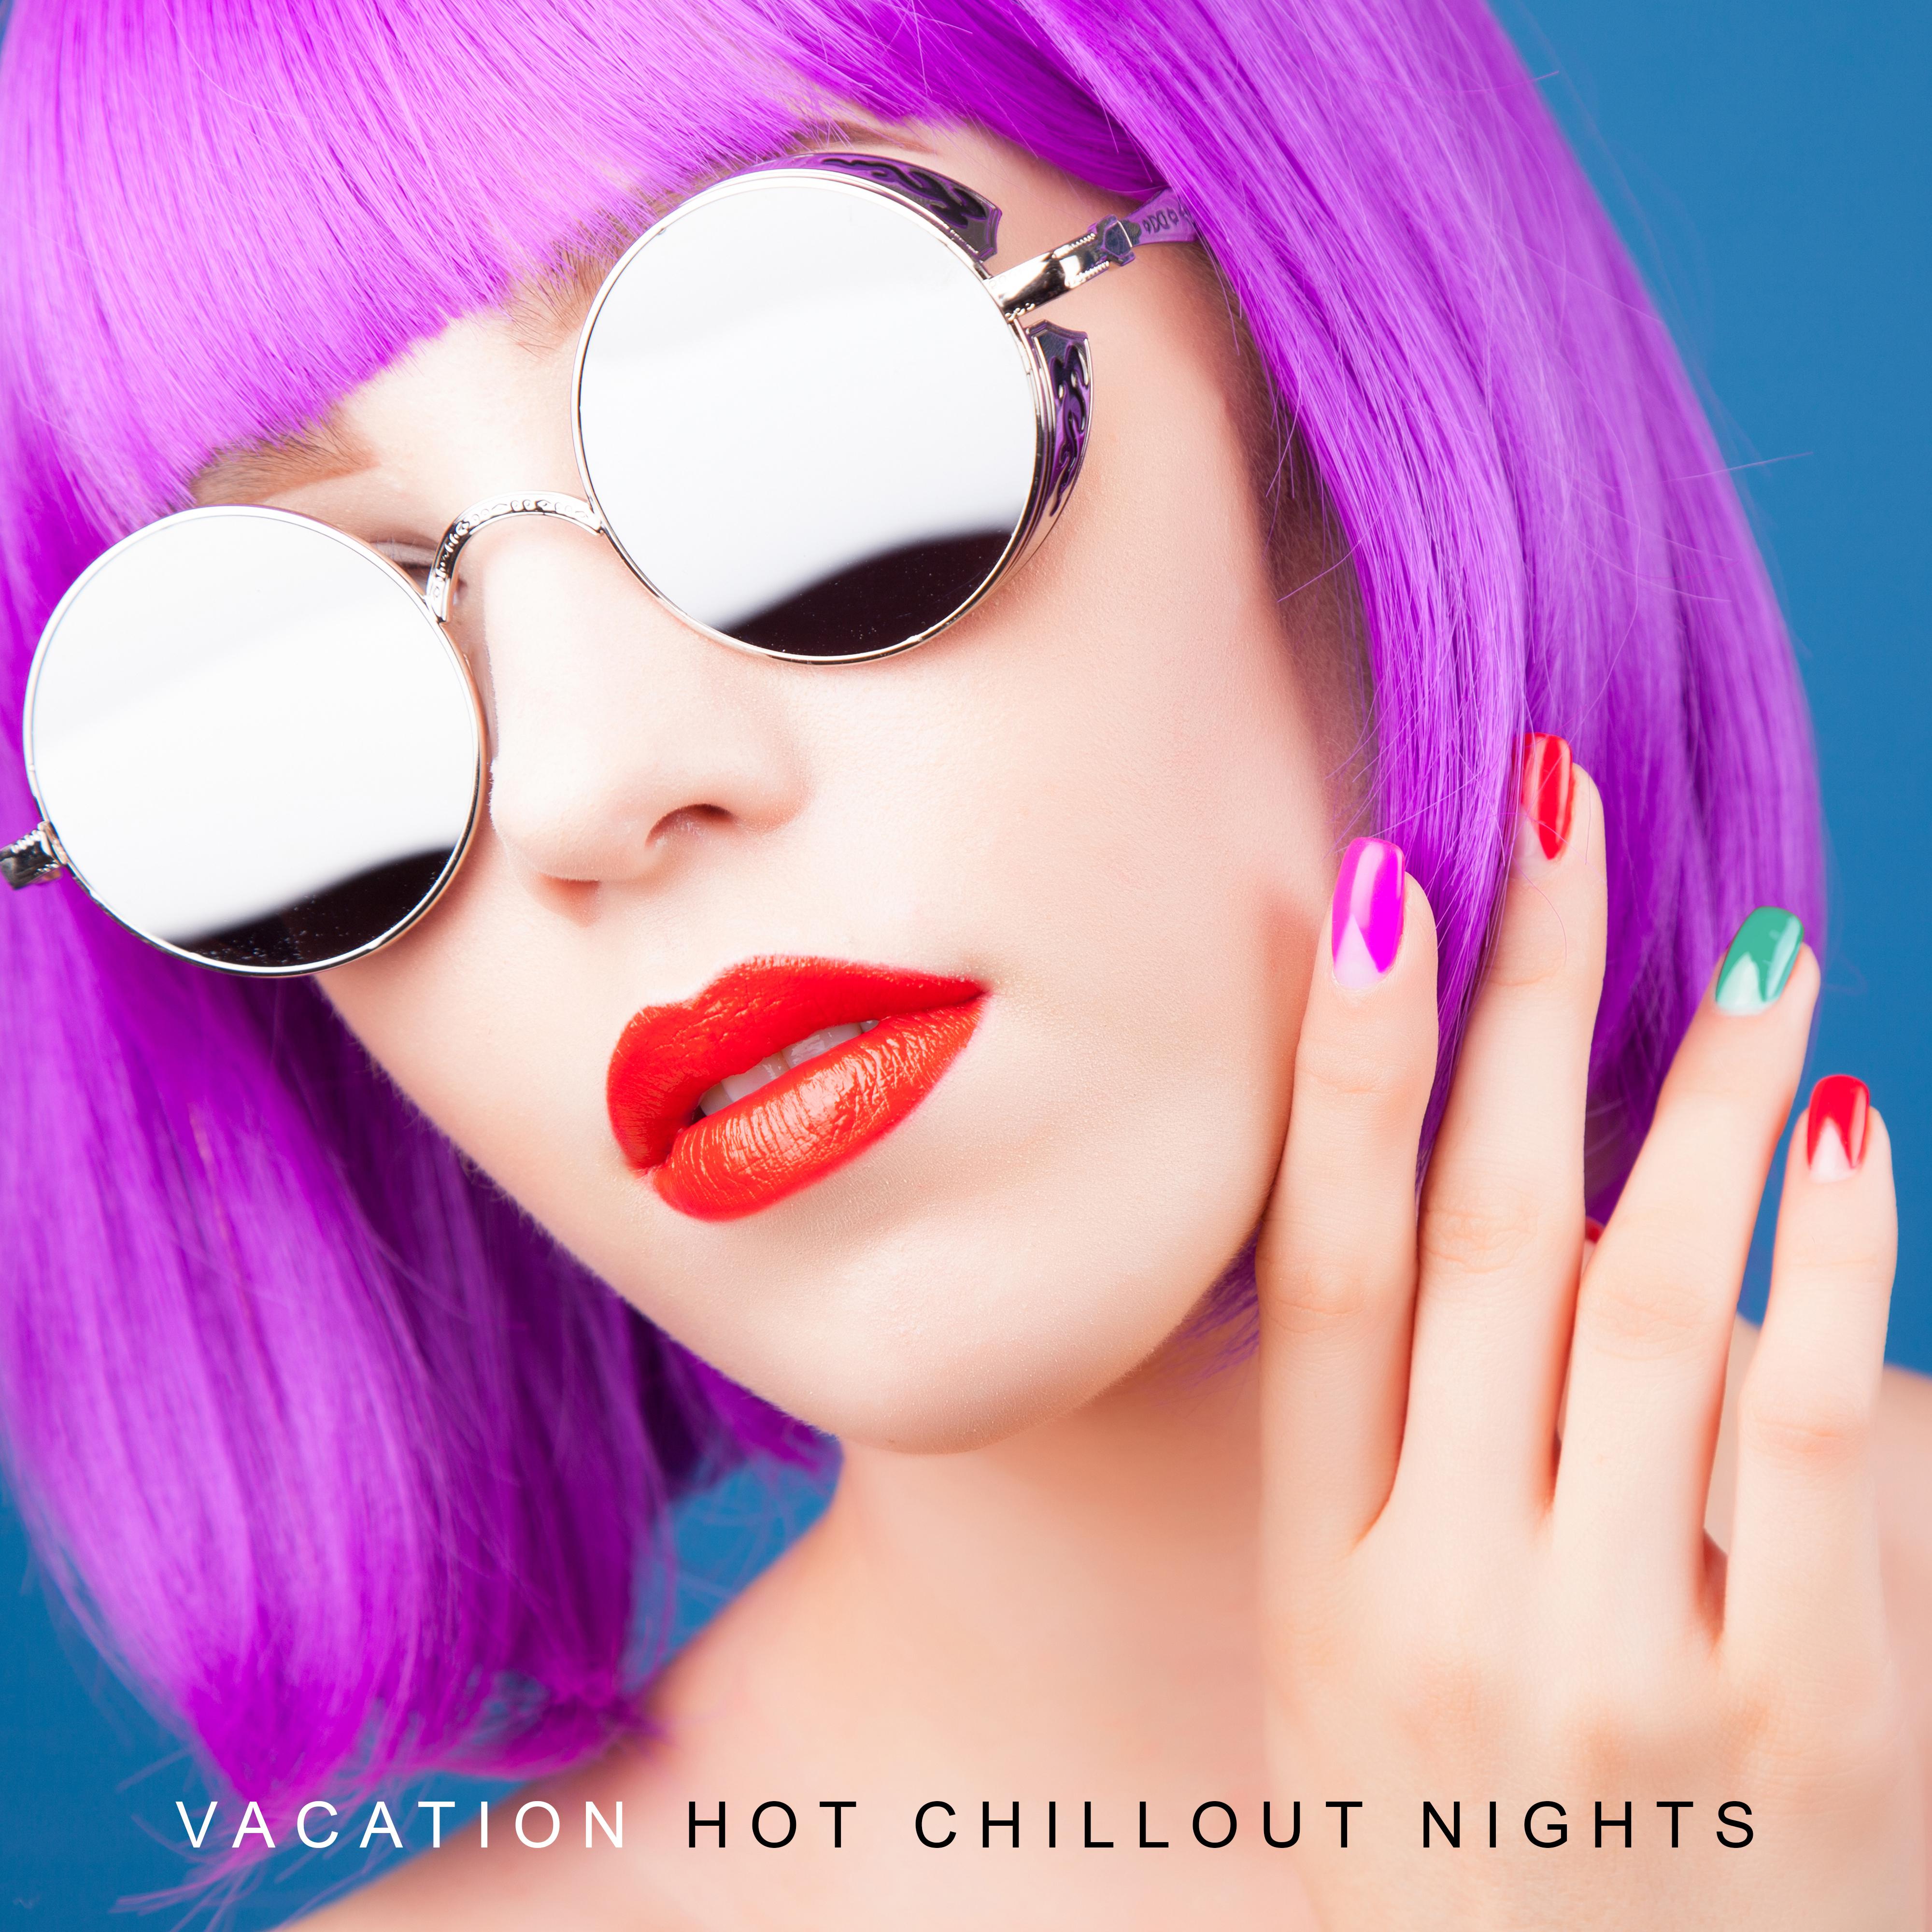 Vacation Hot Chillout Nights: Most Relaxing Chill Out Music Compilation in 2019, Selection of Best Electronic Music for Tropical Holiday Time, Deep Beats & Beautiful Ambient Melodies